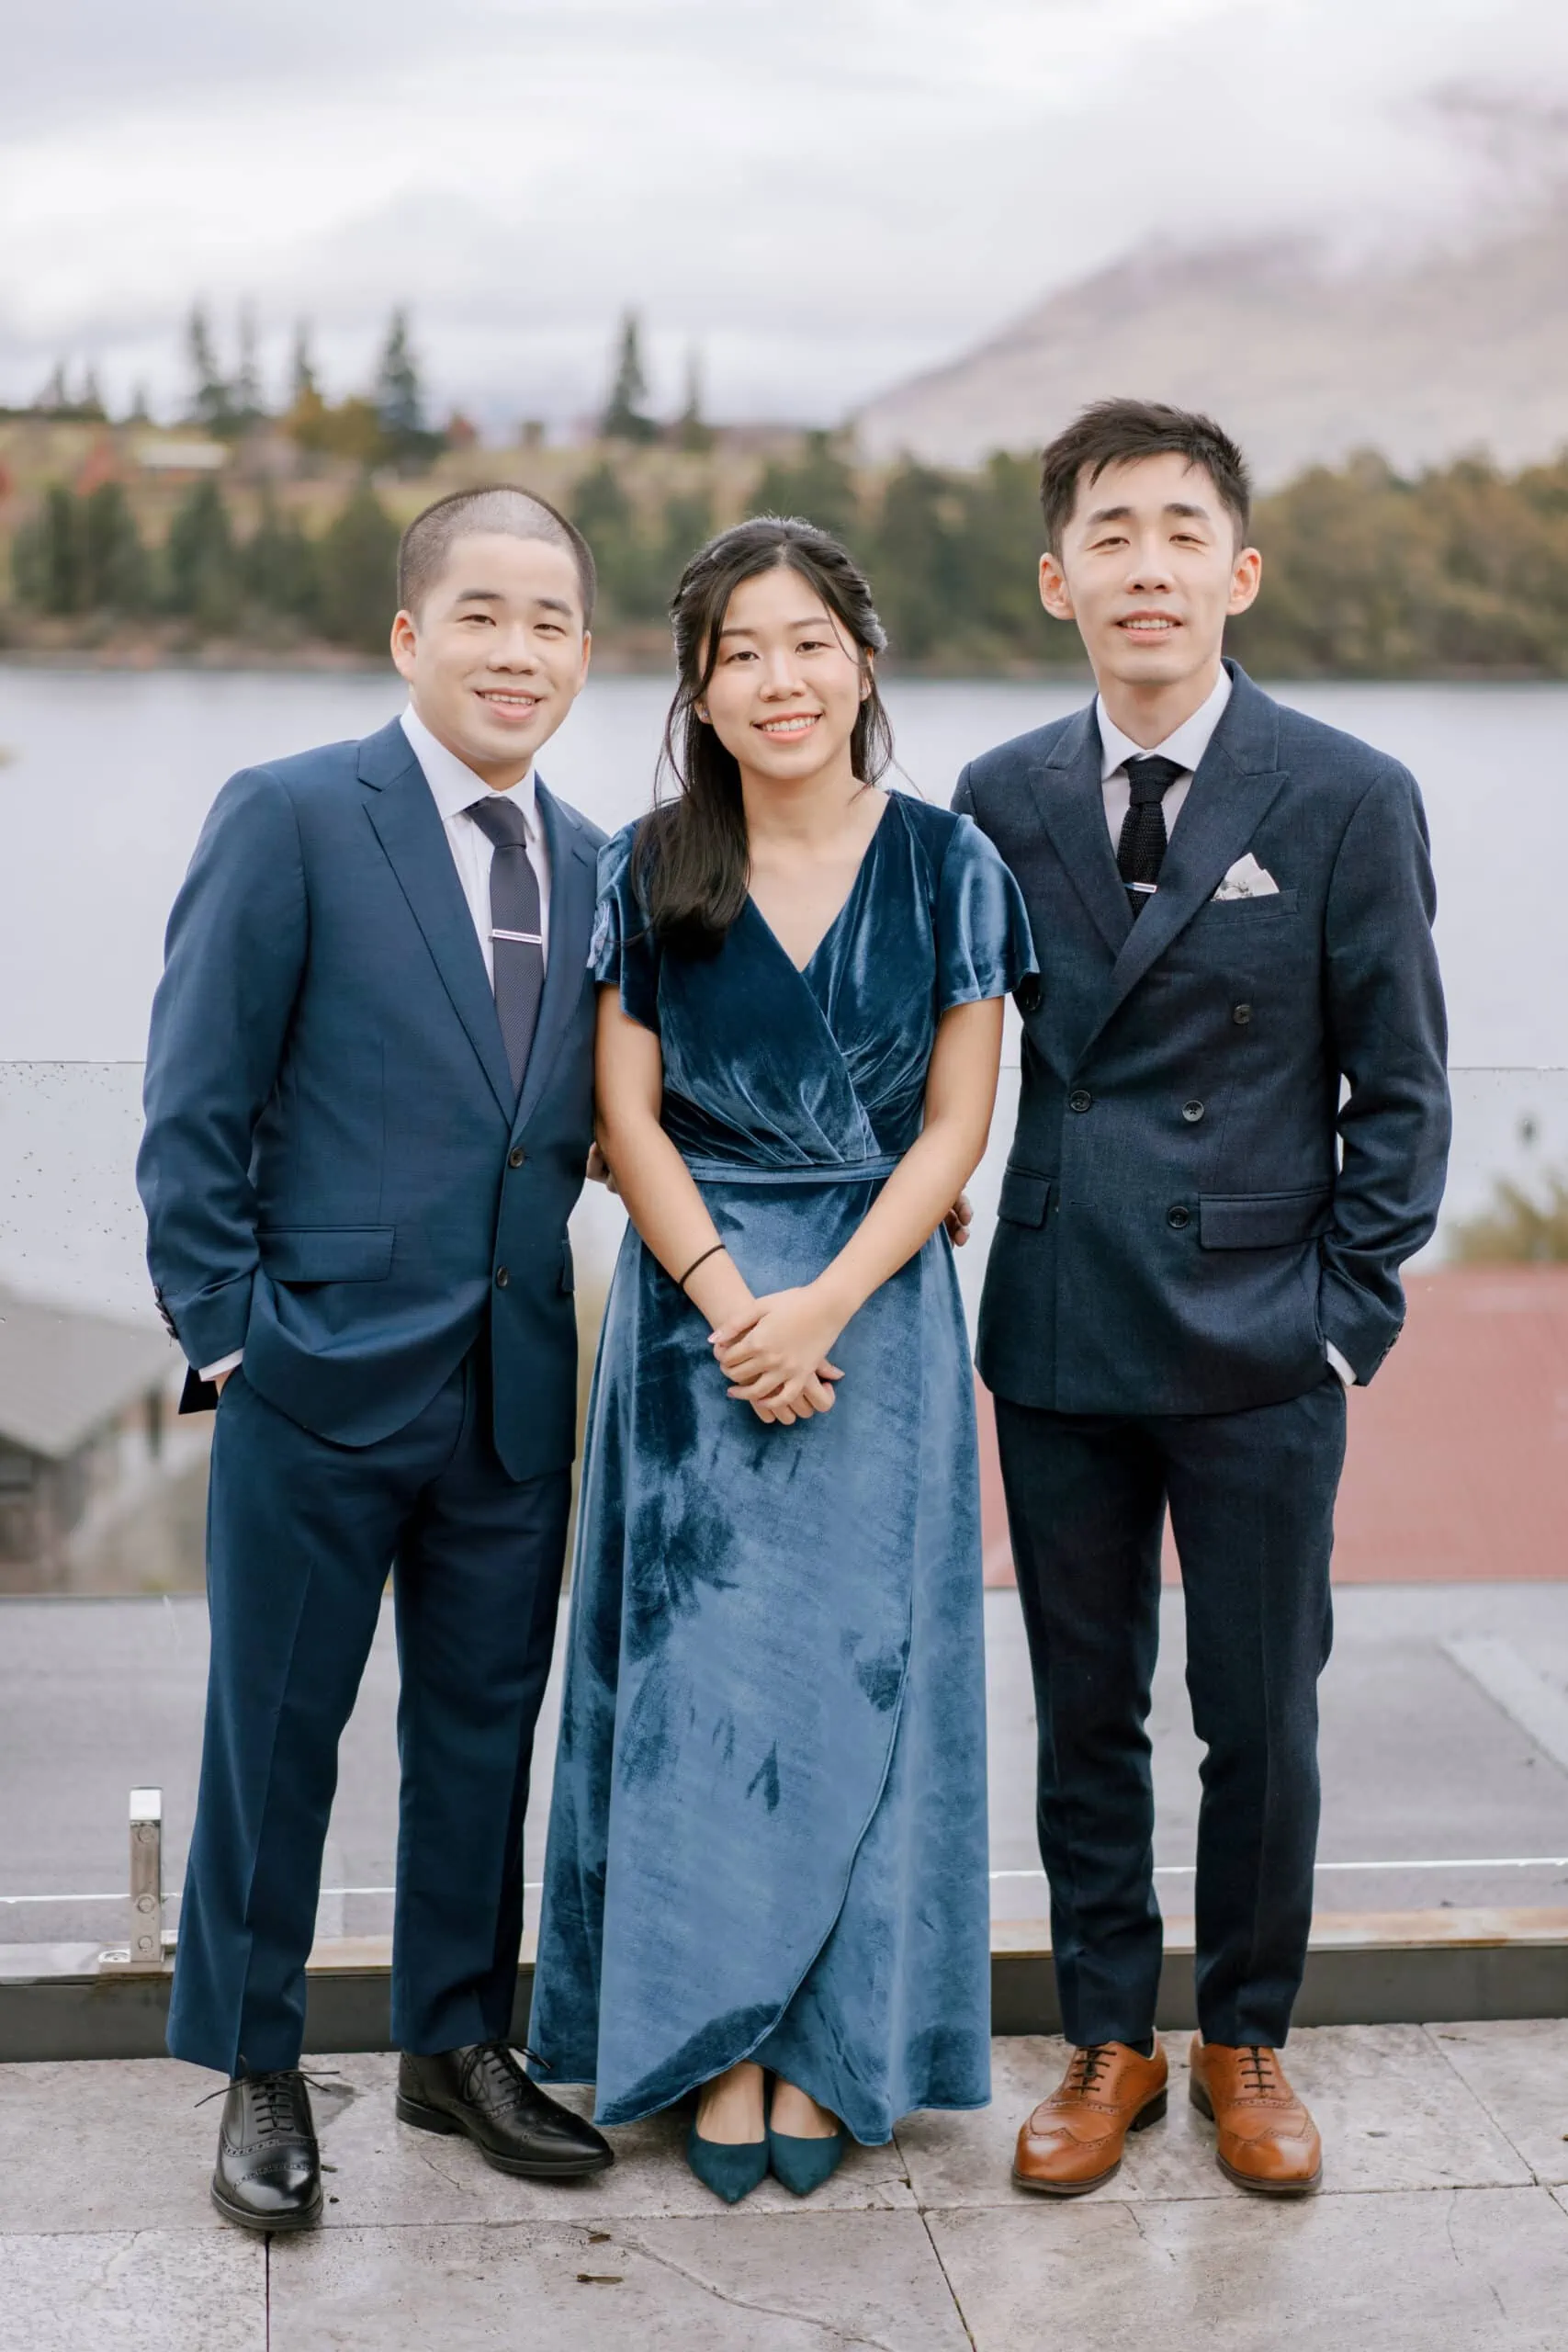 Queenstown New Zealand Elopement Wedding Photographer - Asian people posing for a photo in front of Kamana Lakehouse.